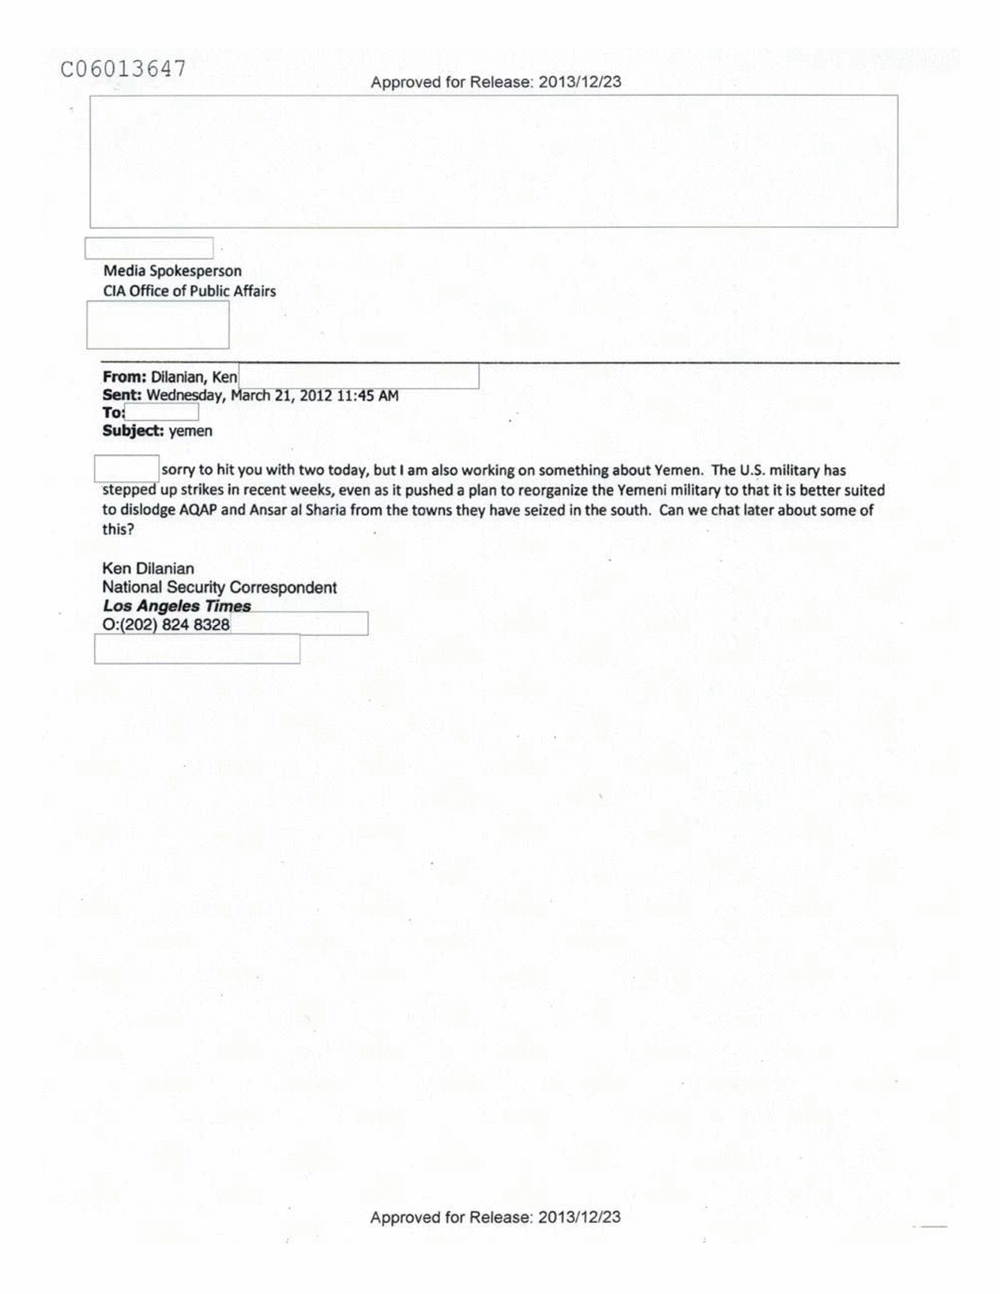 Page 492 from Email Correspondence Between Reporters and CIA Flacks